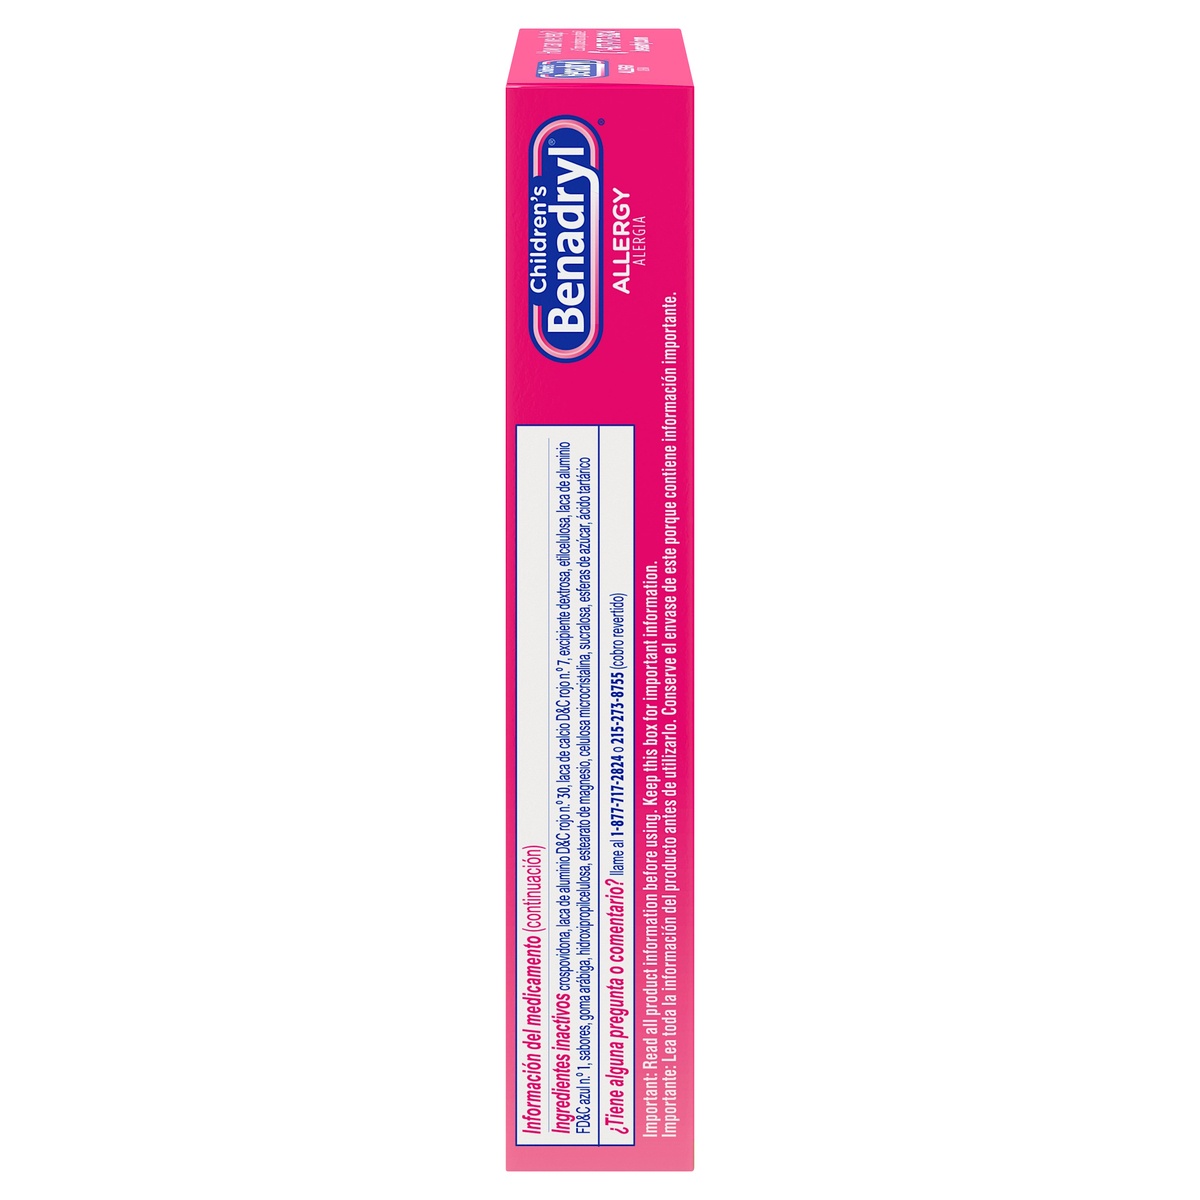 slide 3 of 5, Benadryl Allergy Chewables with Diphenhydramine HCl, Antihistamine Chewable Tablets For Relief of Allergy Symptoms Like Sneezing, Itchy Eyes, & More, Grape Flavor, 20 ct